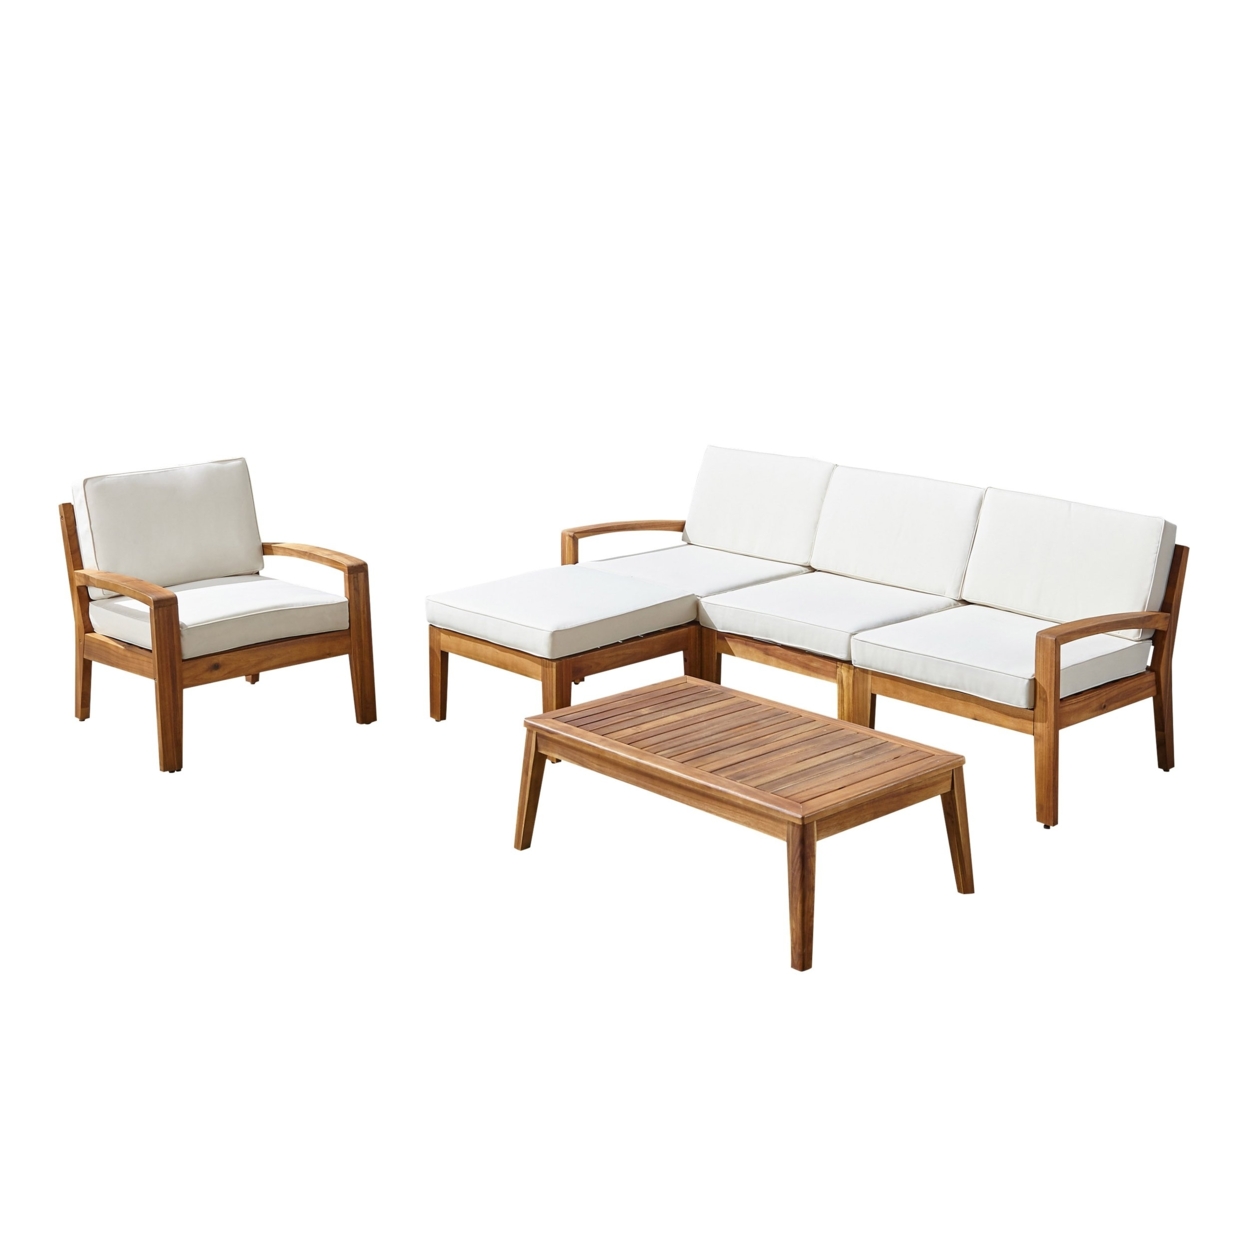 Parma 4-Seater Sectional Sofa Set For Patio With Club Chair - Teak / Beige